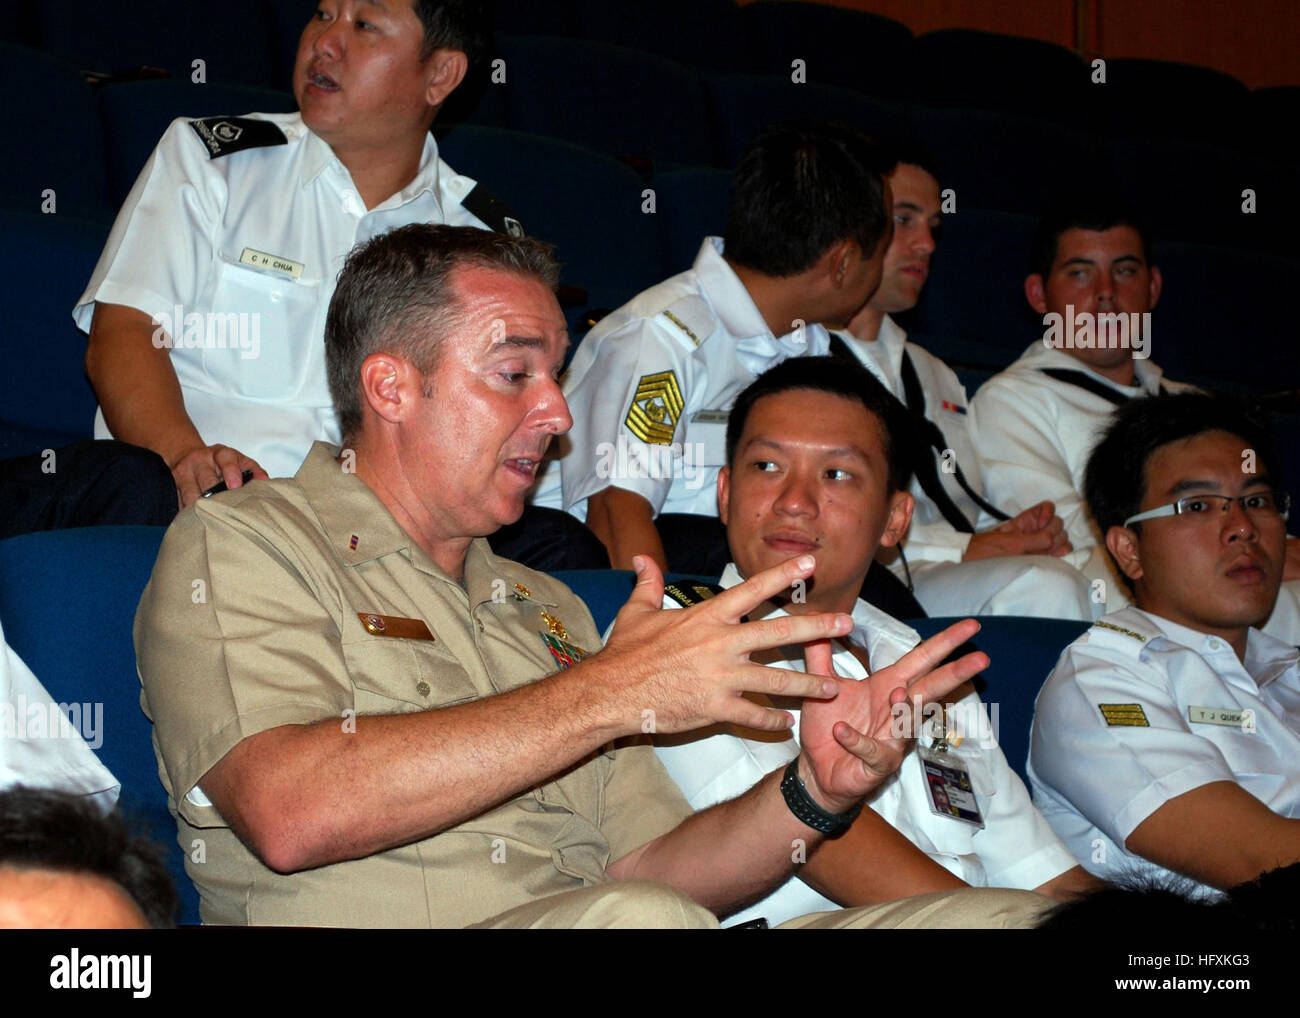 090619-N-0869H-017 SINGAPORE (June 19, 2009) Chief Warrant Officer Troy Roat, assigned to Mobile Diving and Salvage Unit (MDSU) 1, Company 14, speaks with a Republic of Singapore Navy officer during the closing ceremony of the Singapore phase of Cooperation Afloat Readiness and Training (CARAT) 2009. CARAT is a series of bilateral exercises held annually in Southeast Asia to strengthen relationships and enhance the operational readiness of the participating forces. (U.S. Navy photo by Senior Chief Mass Communication Specialist Susan Hammond/Released) US Navy 090619-N-0869H-017 Chief Warrant Of Stock Photo